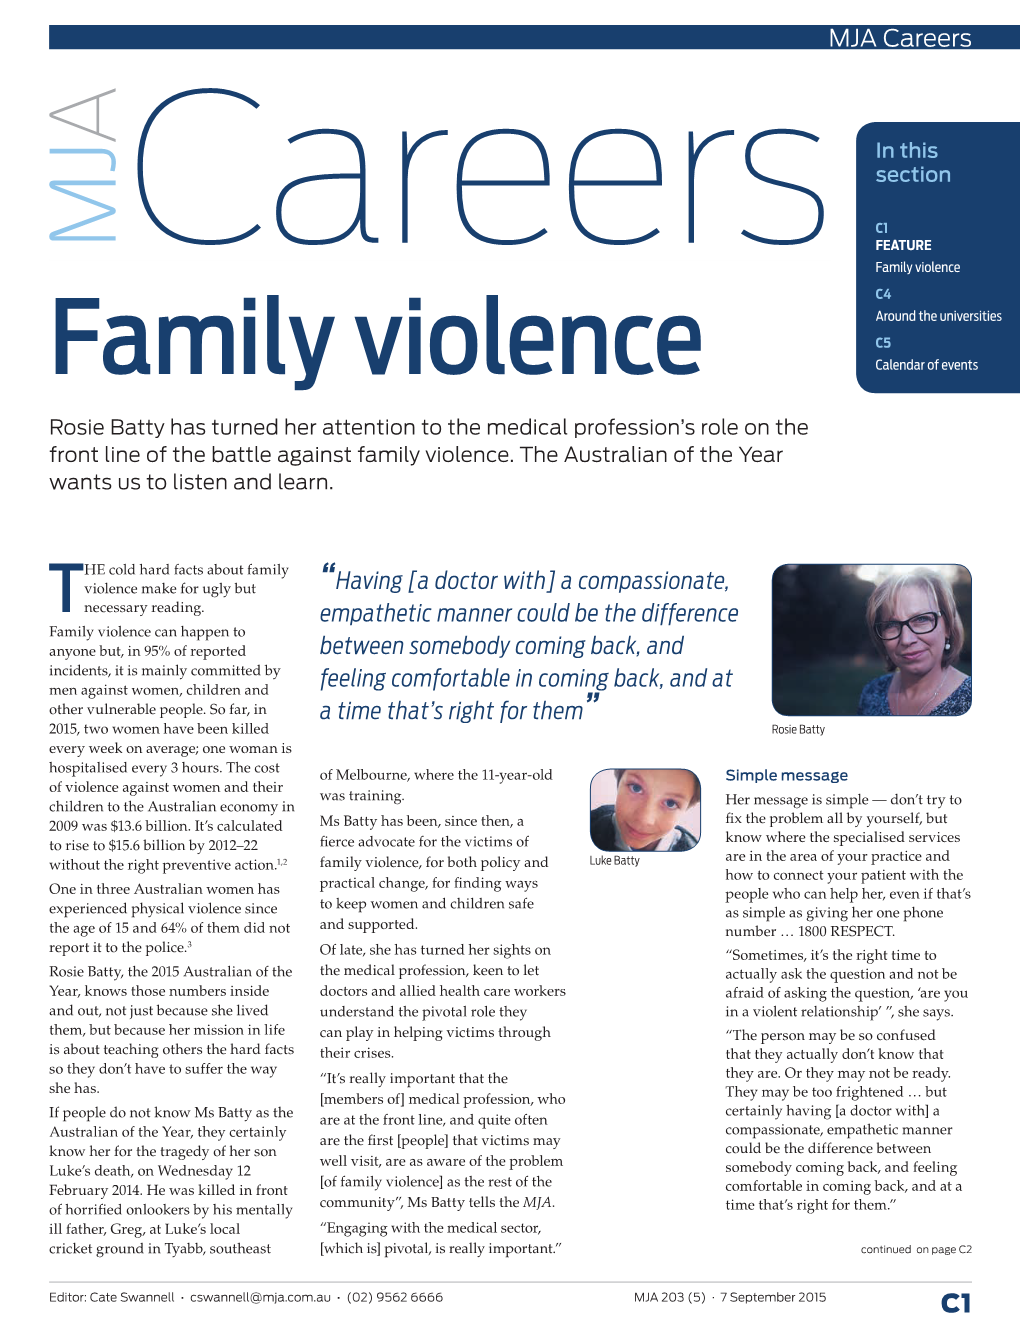 Family Violence C4 Around the Universities C5 Family Violence Calendar of Events